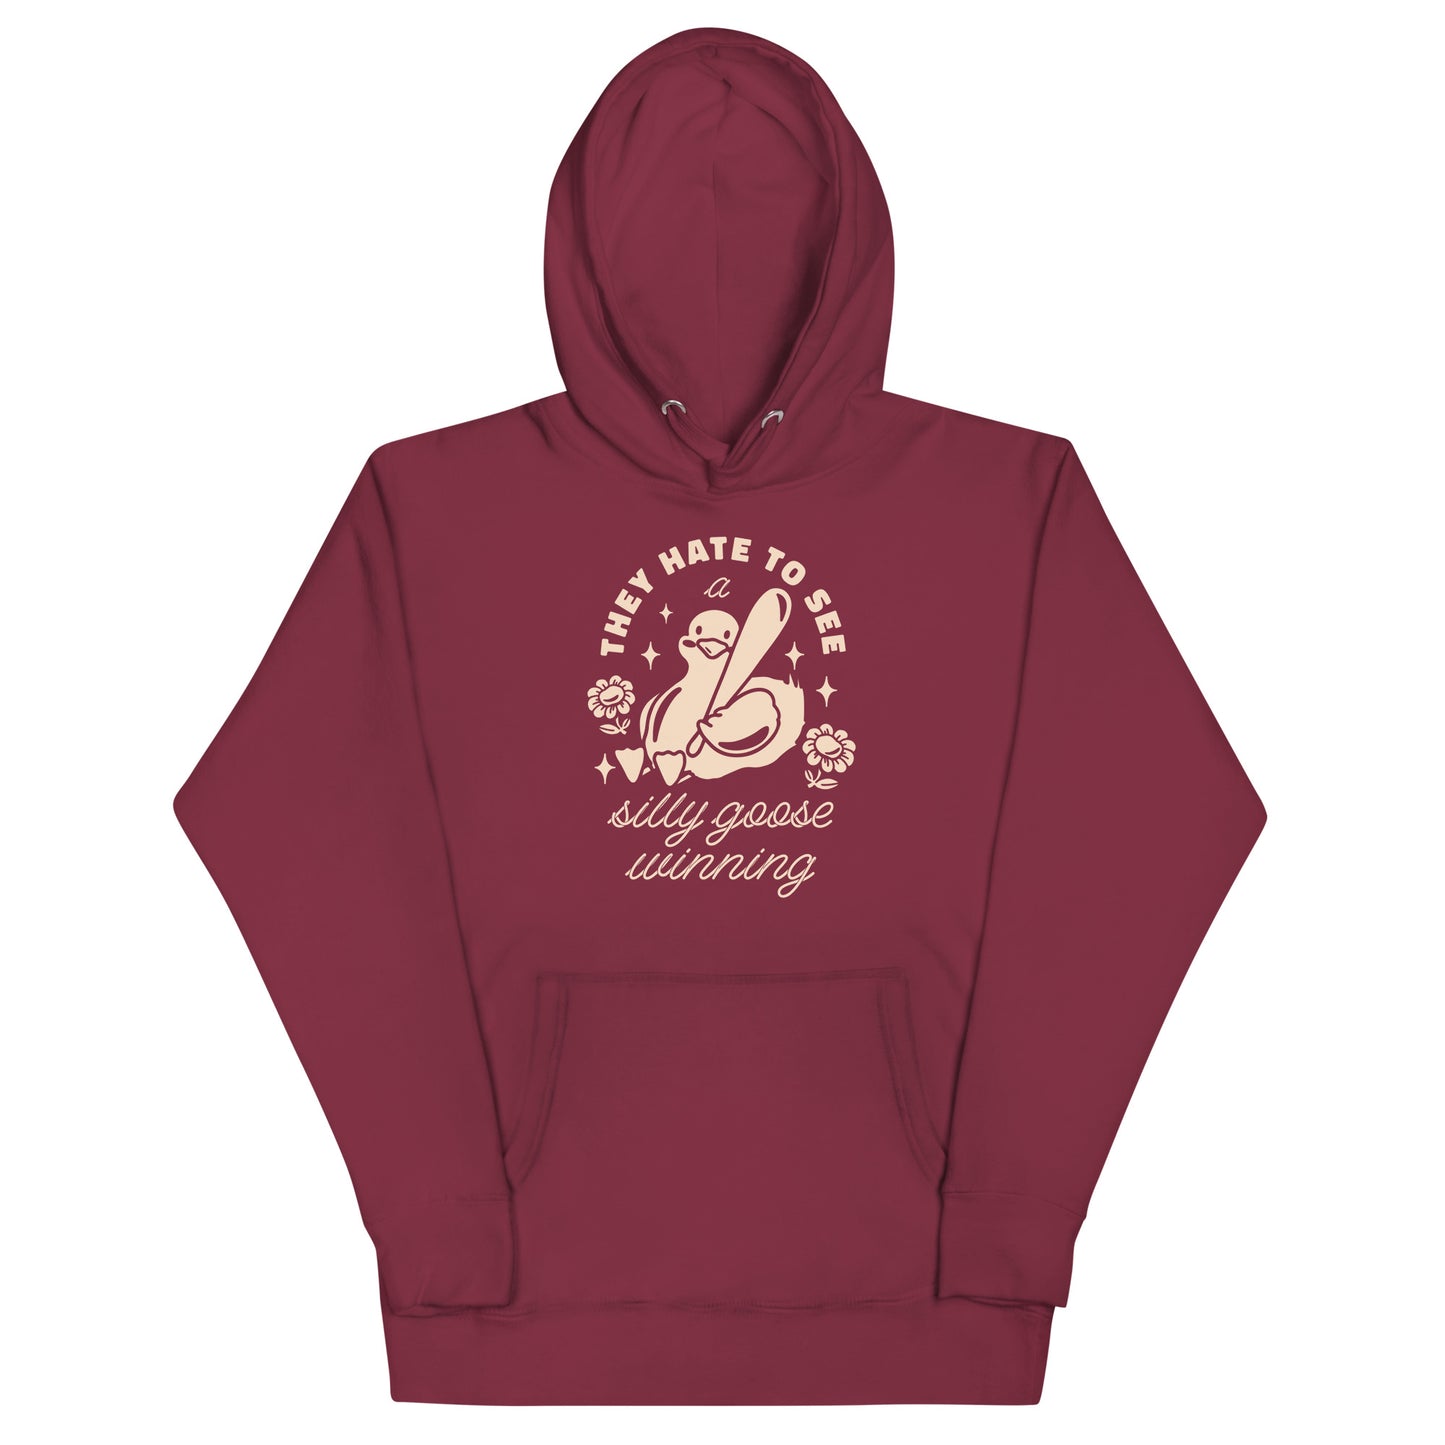 They Hate To See a Silly Goose Winning Unisex Hoodie